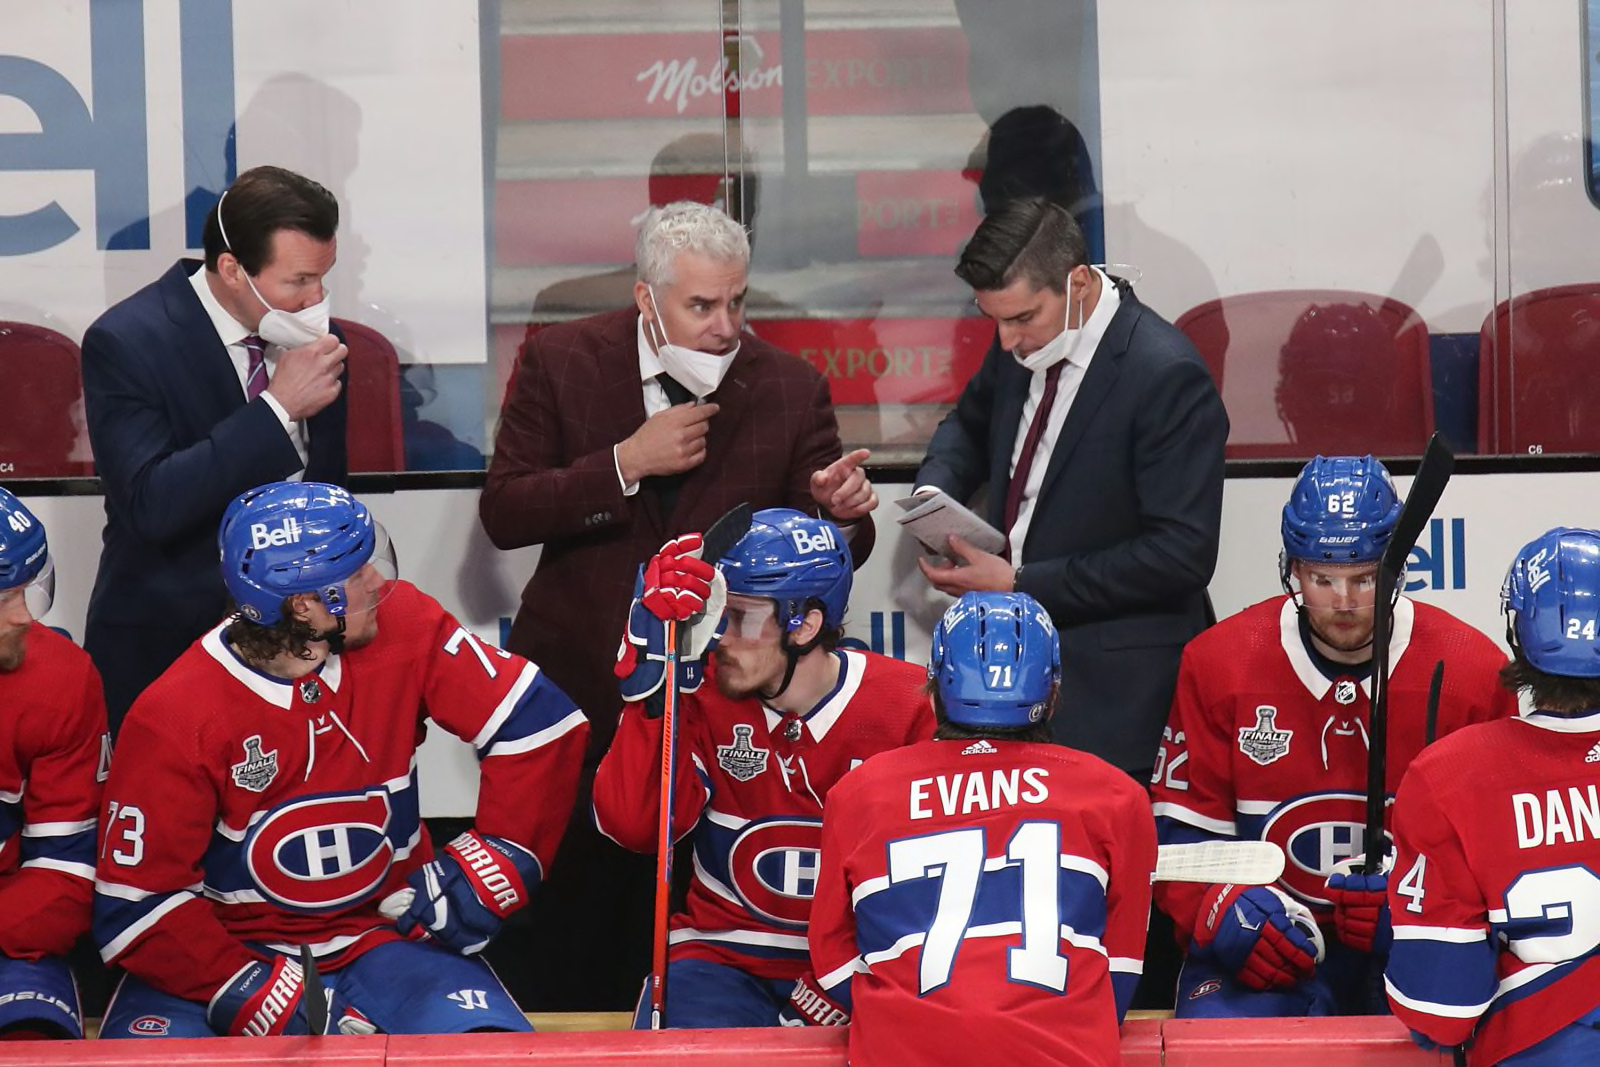 The Montreal Canadiens have a new jersey or do they?